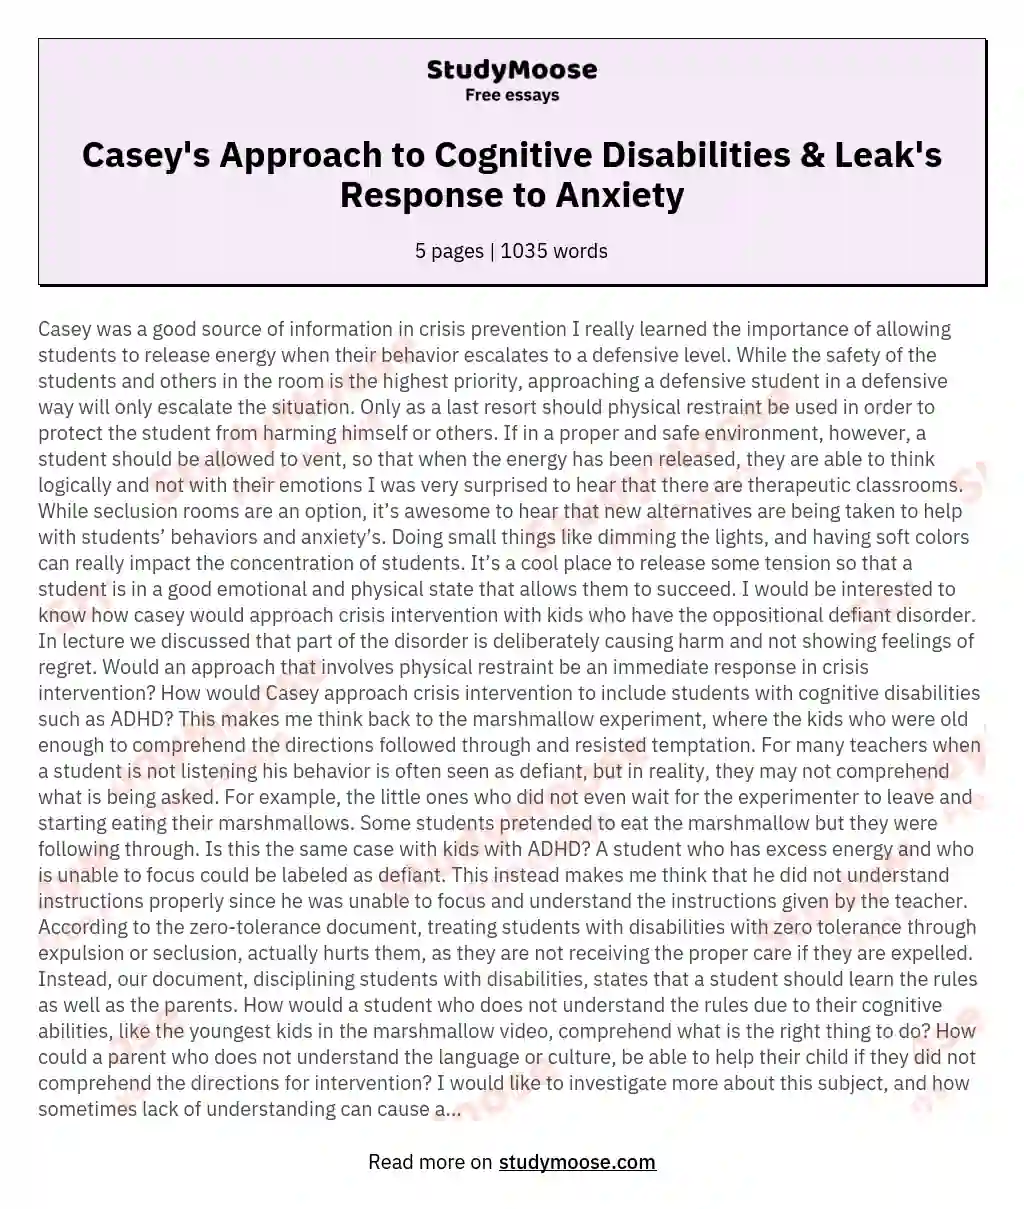 Casey's Approach to Cognitive Disabilities & Leak's Response to Anxiety essay